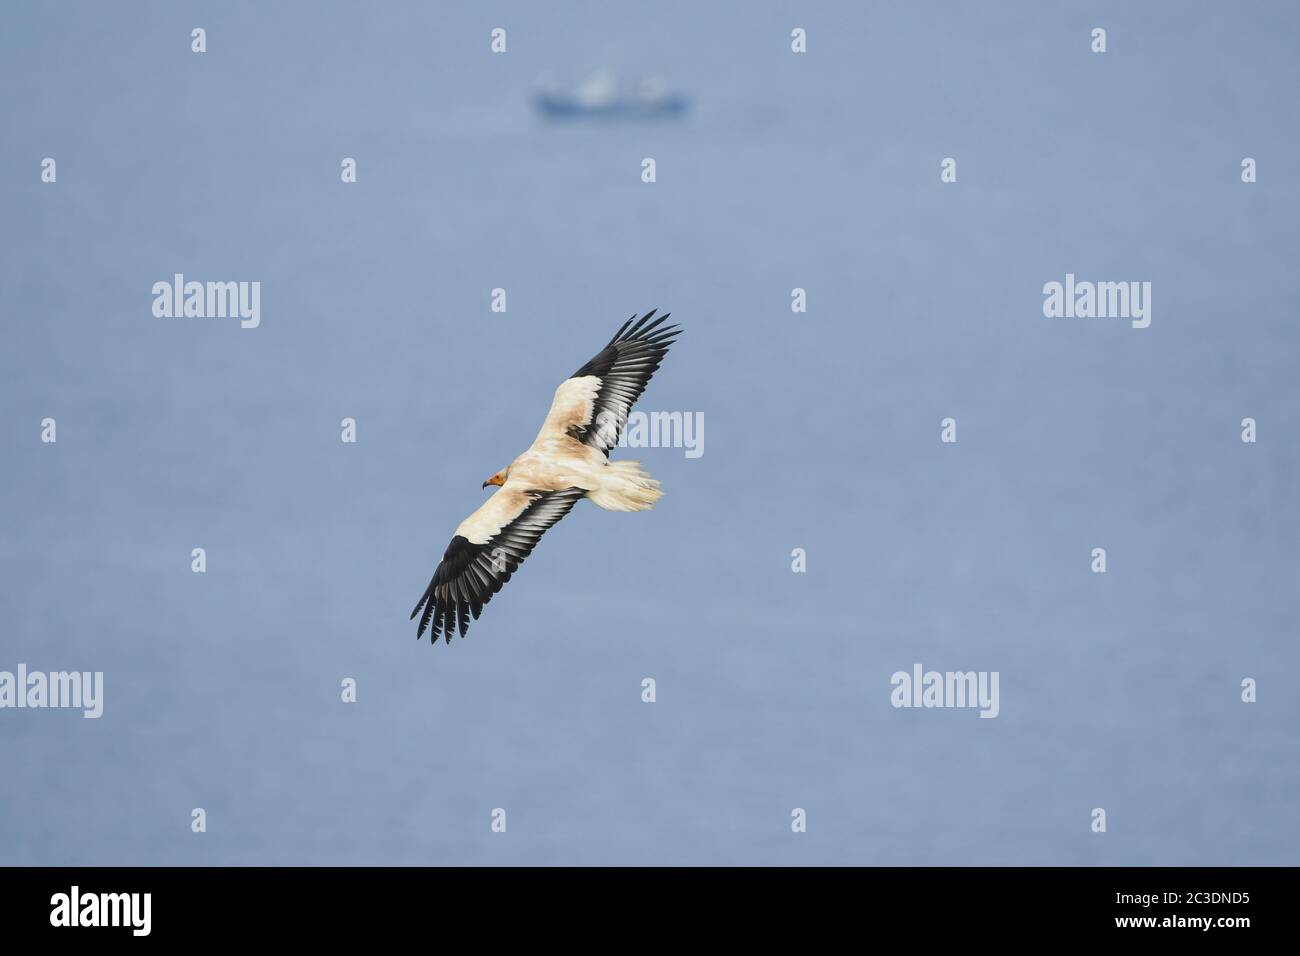 Egyptian vulture in flight over the sea with a boat in the background Stock Photo